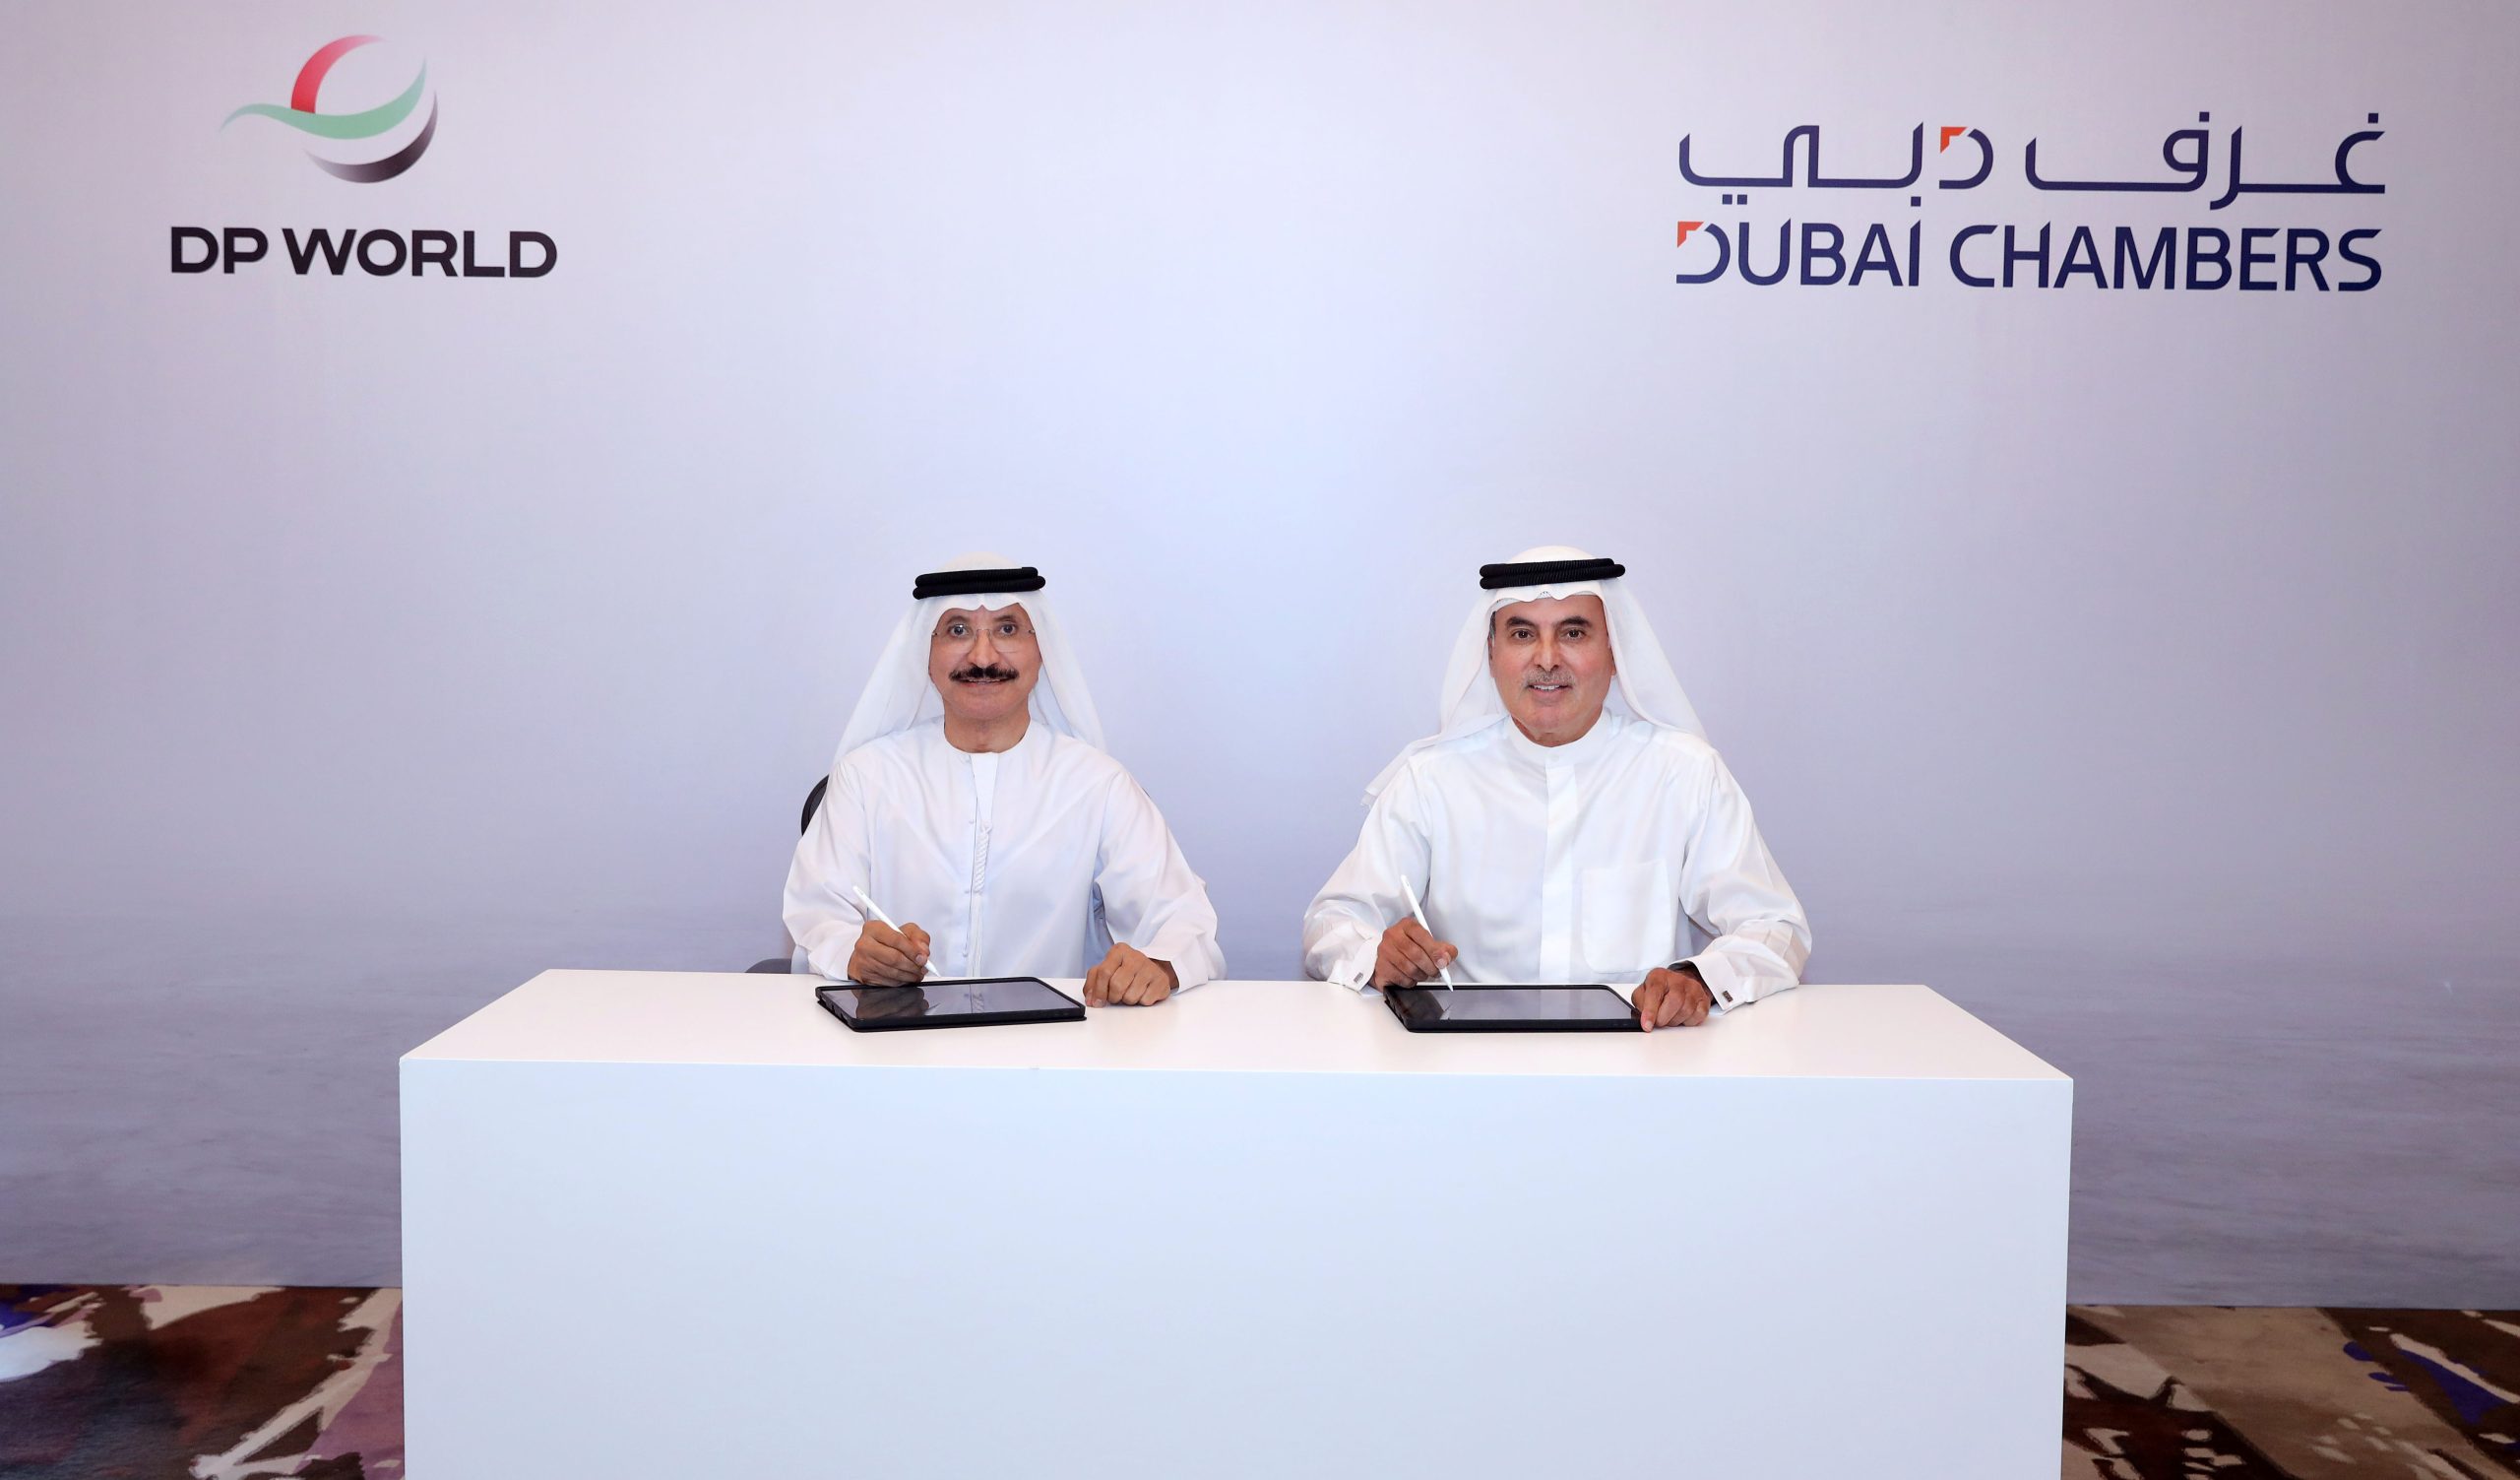 Dubai Chambers partners with DP World to drive overseas expansion and enhance Dubai’s competitiveness in global investment landscape